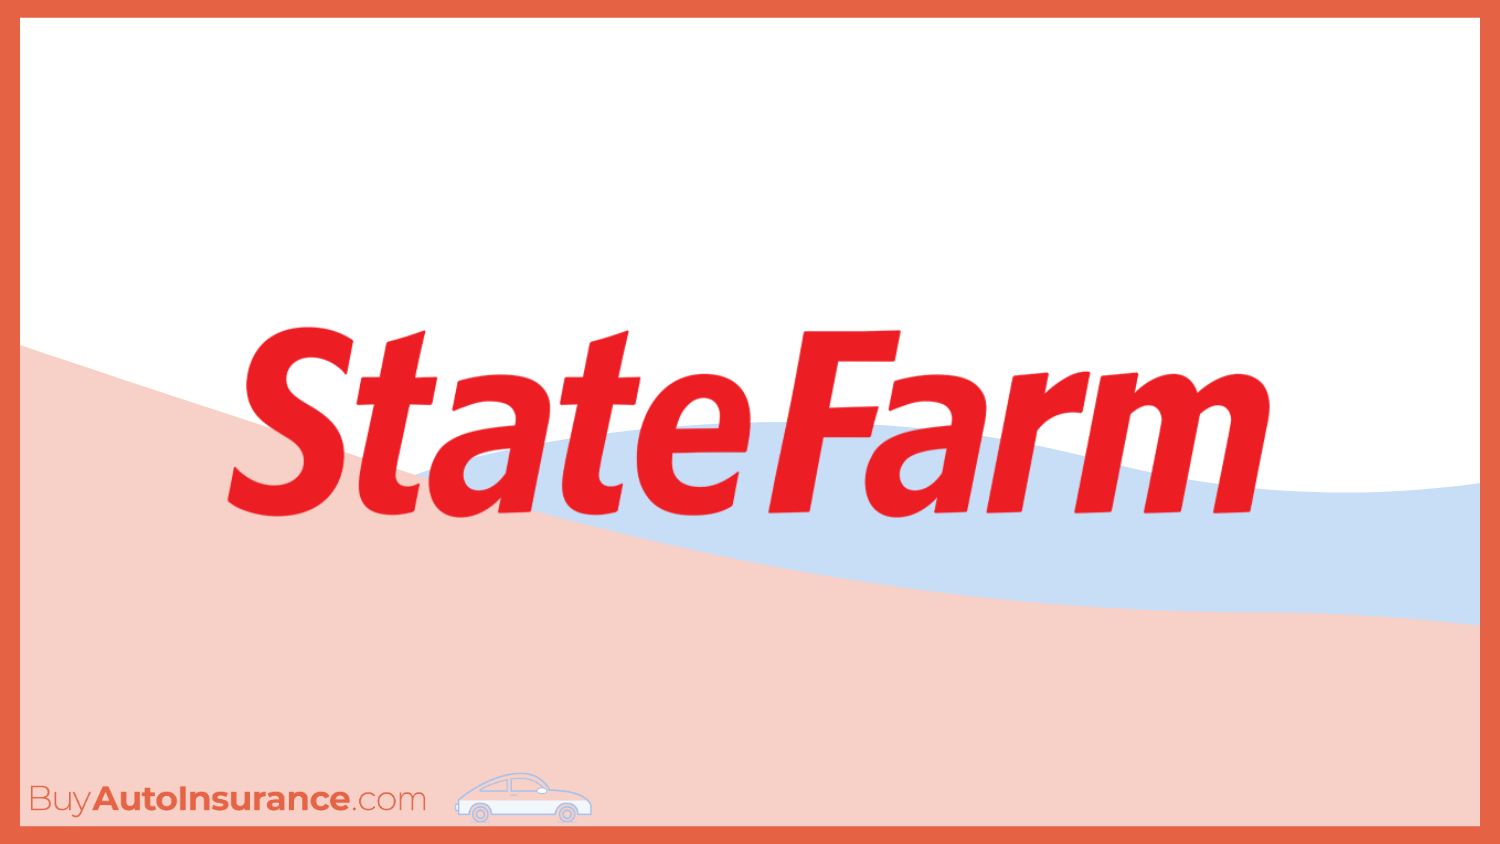 Cheap Auto Insurance Companies That Don't Monitor Your Driving: State Farm